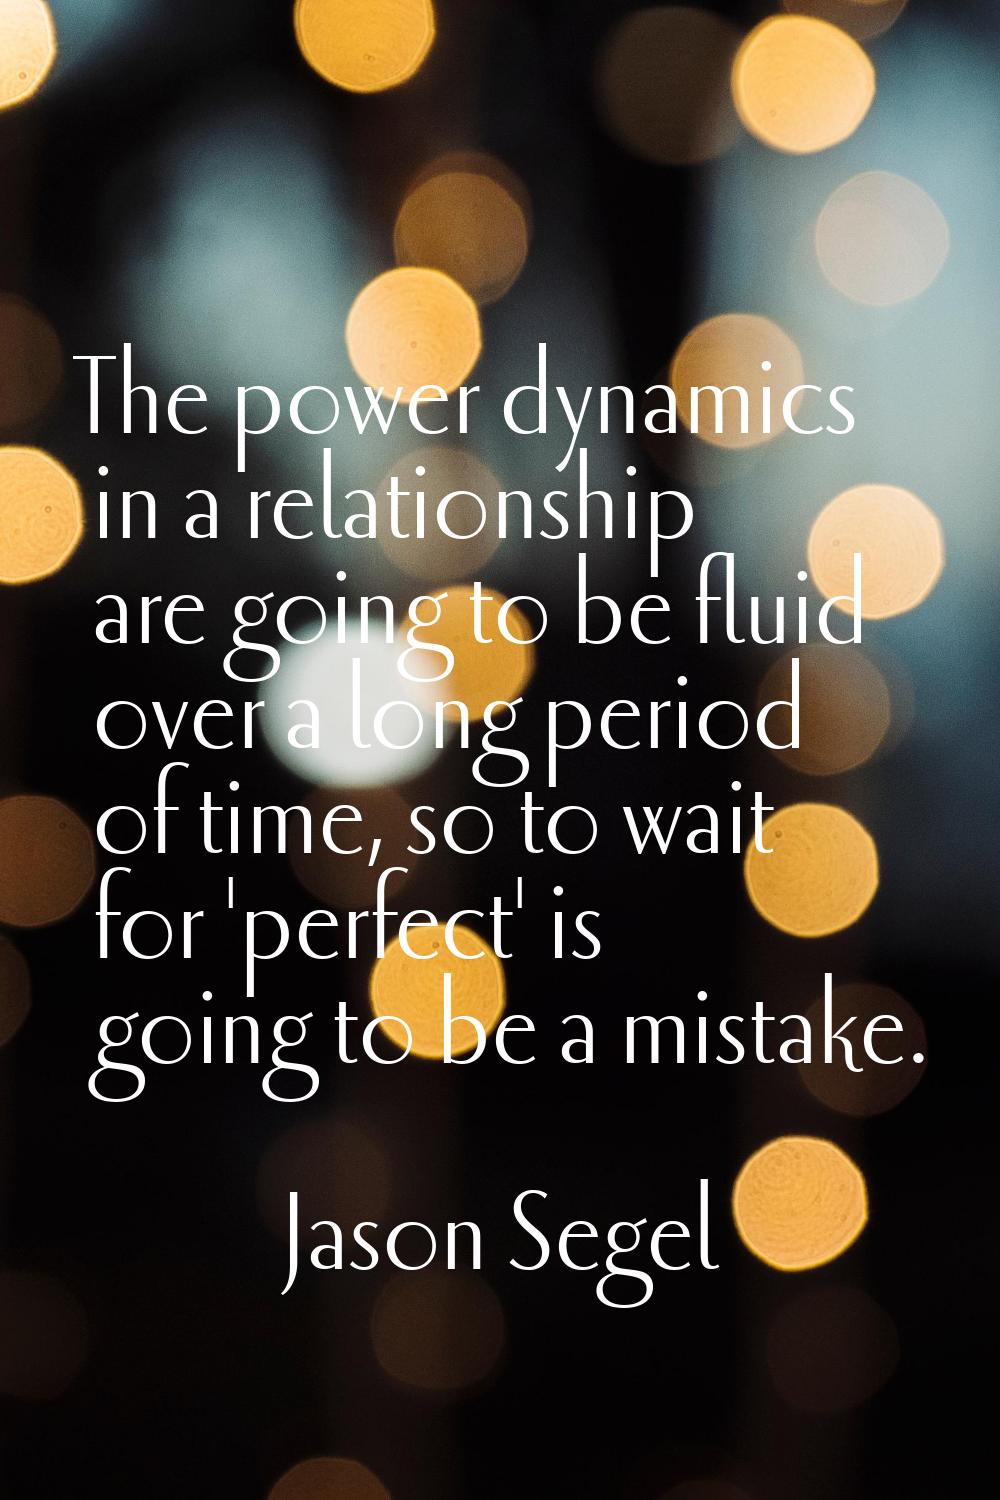 The power dynamics in a relationship are going to be fluid over a long period of time, so to wait f